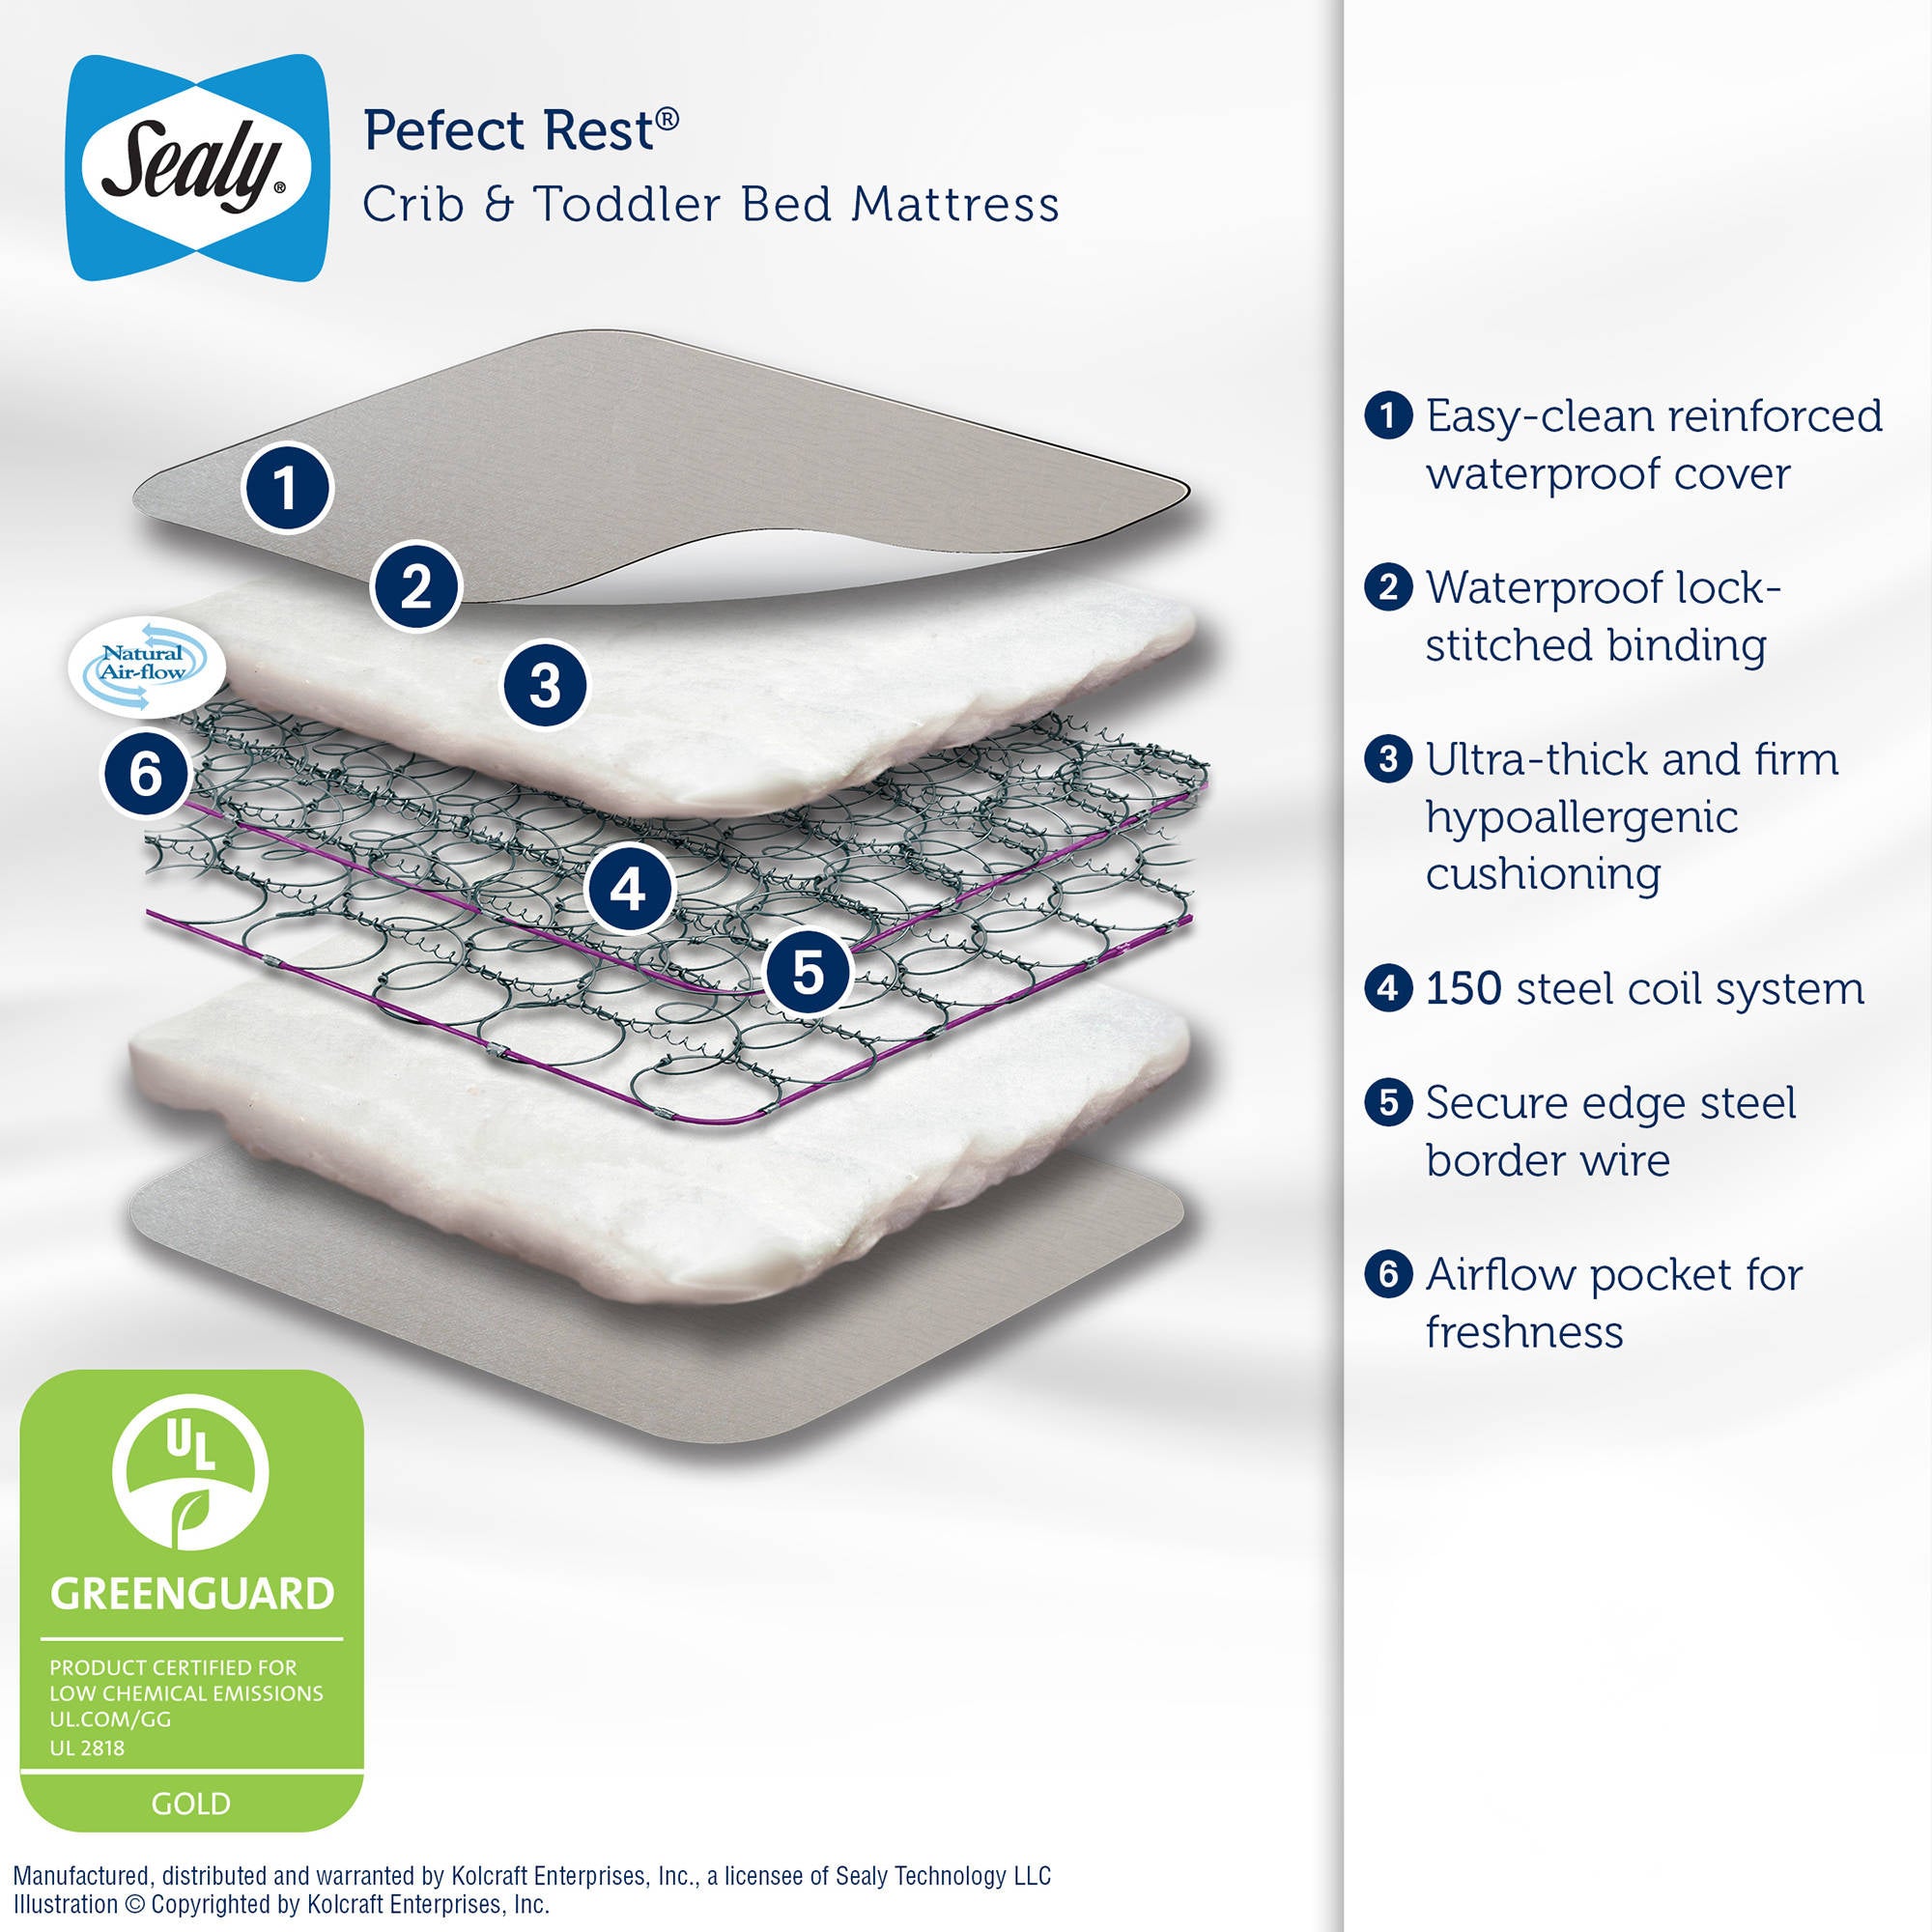 Sealy Baby Perfect Rest Waterproof Standard Toddler & Baby Crib Mattress